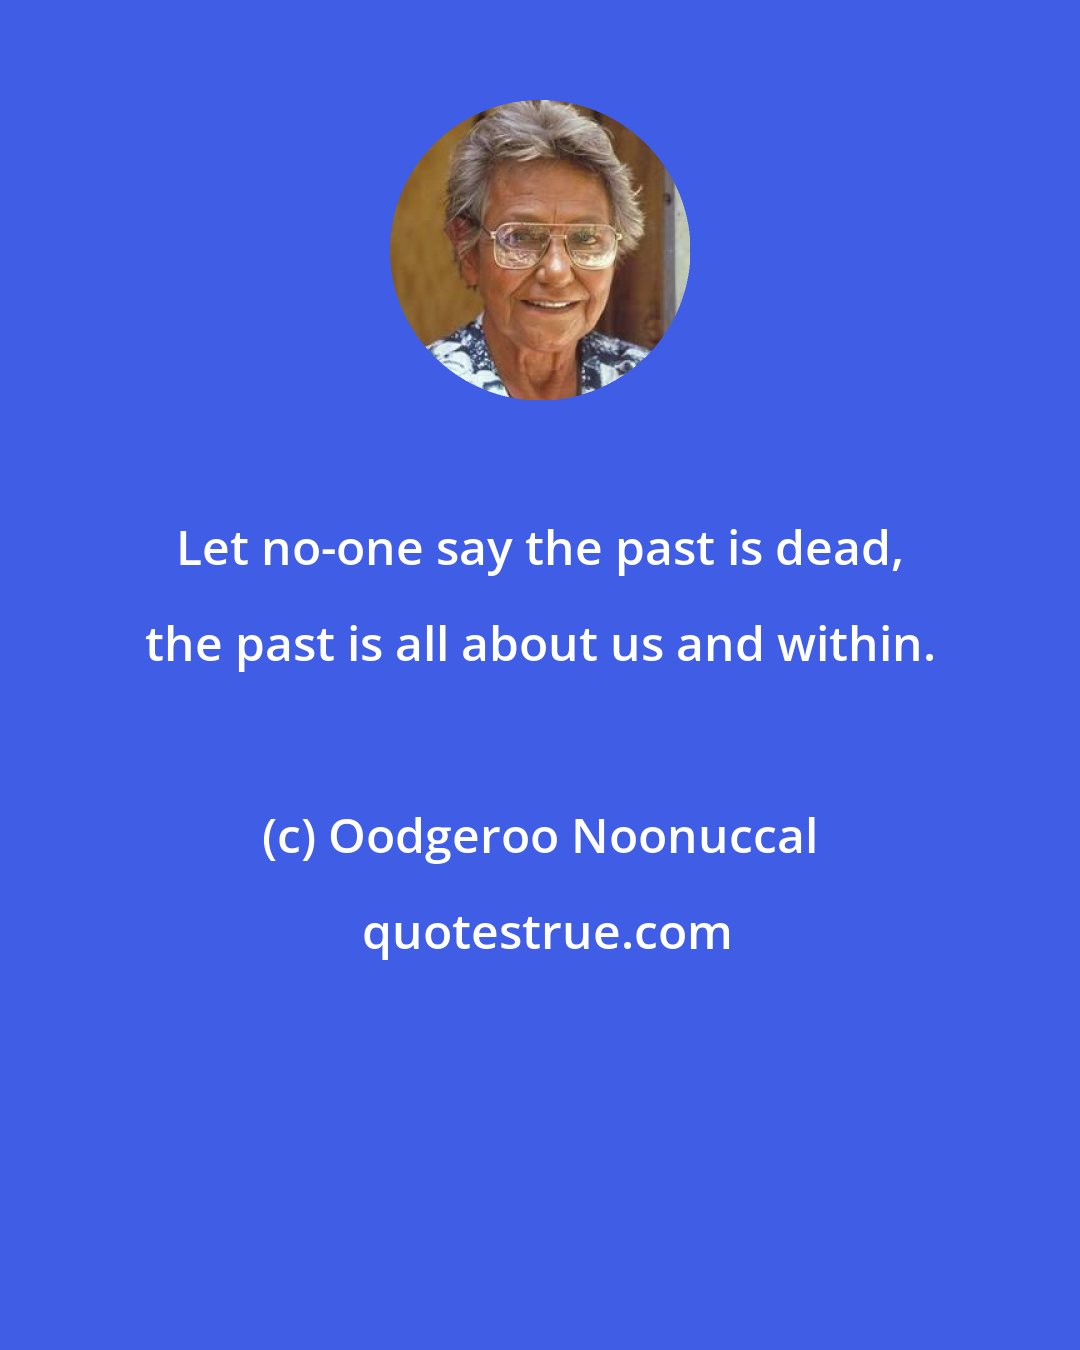 Oodgeroo Noonuccal: Let no-one say the past is dead, the past is all about us and within.